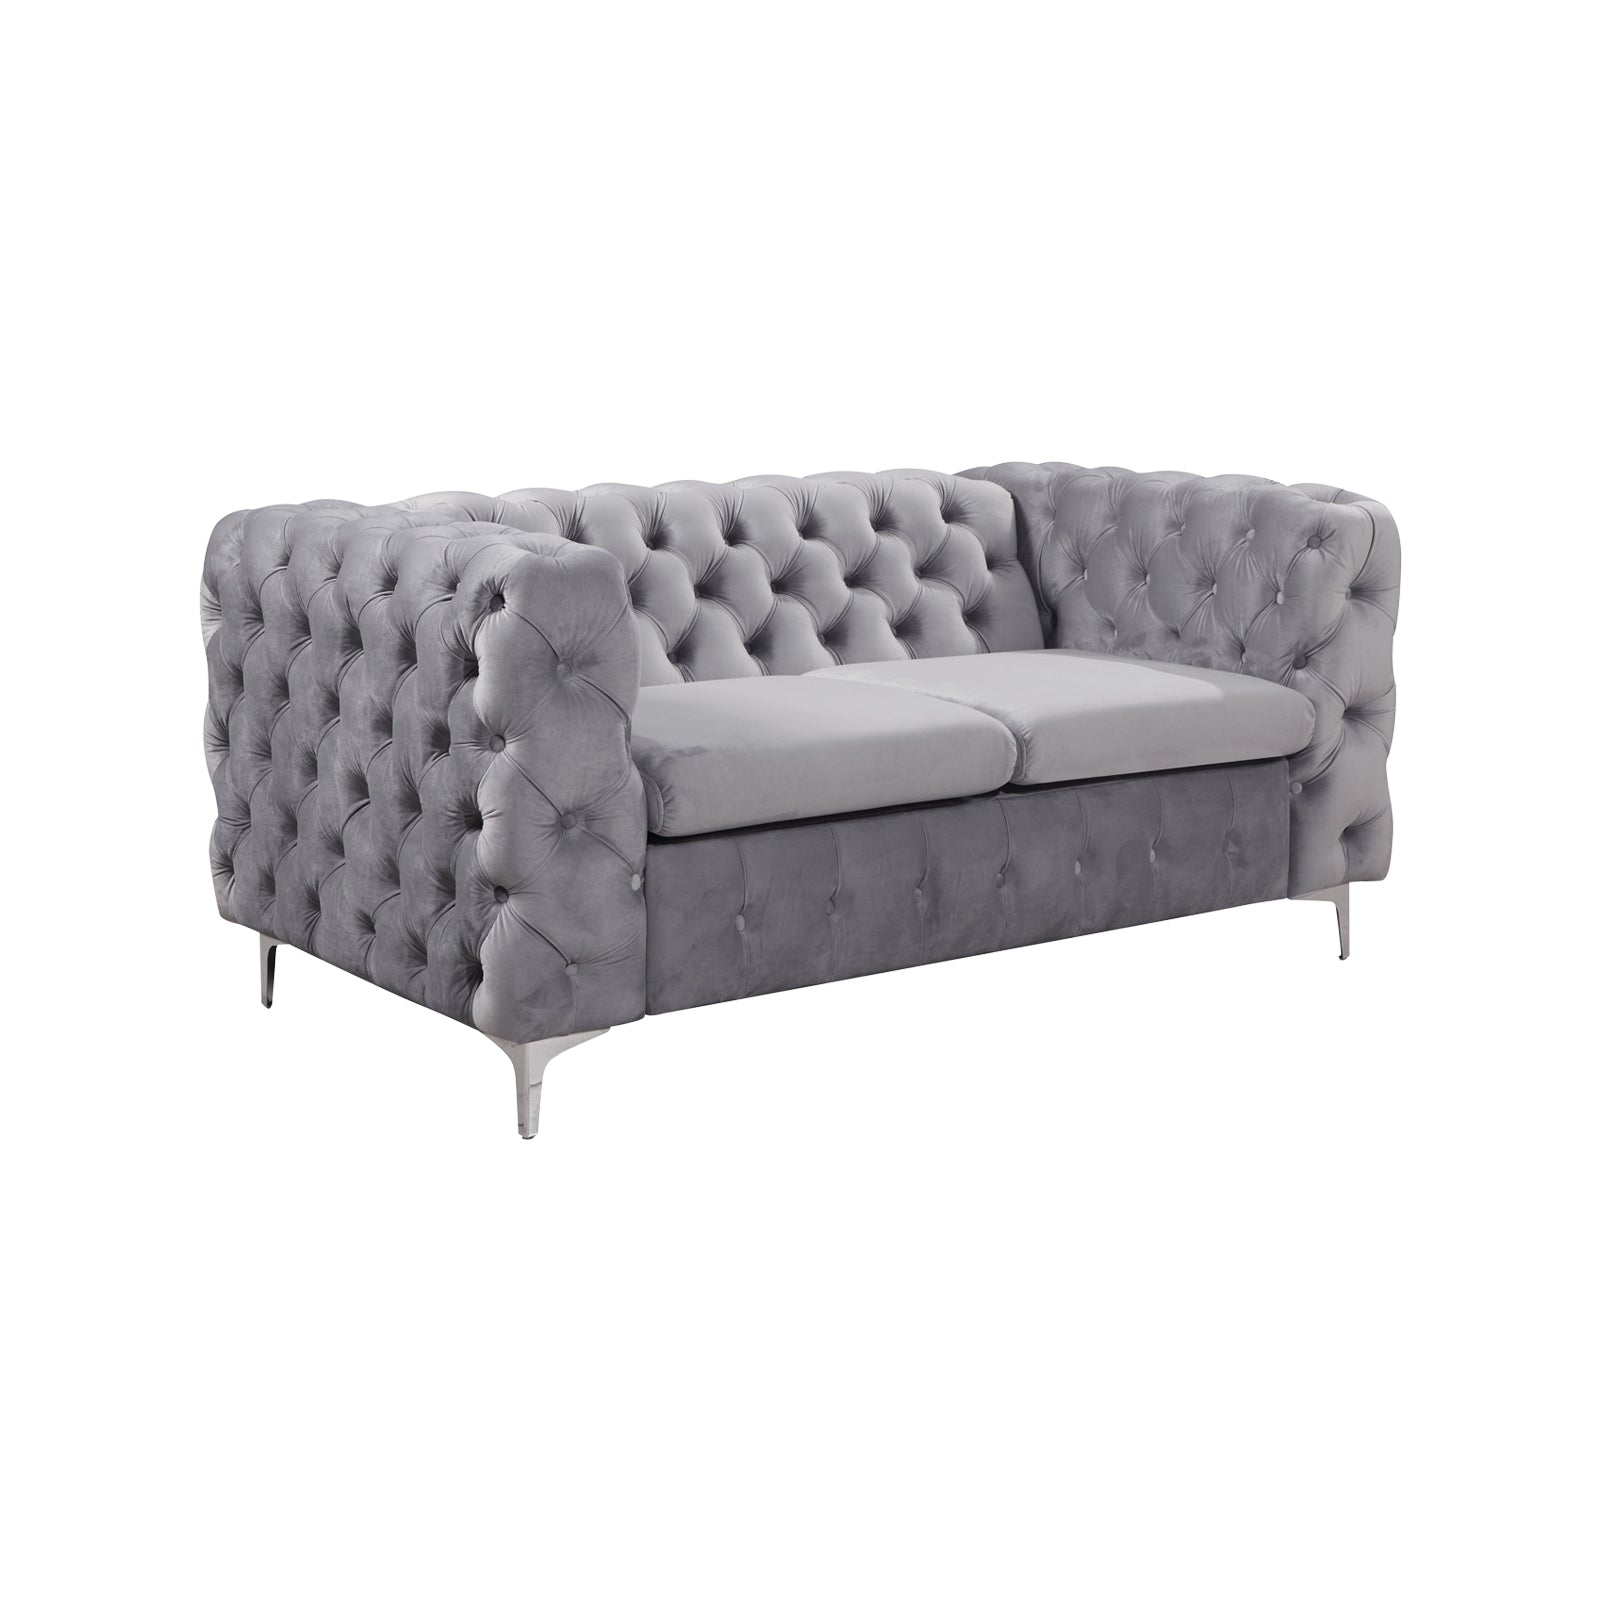 Jodie 2 Seater Grey Colour